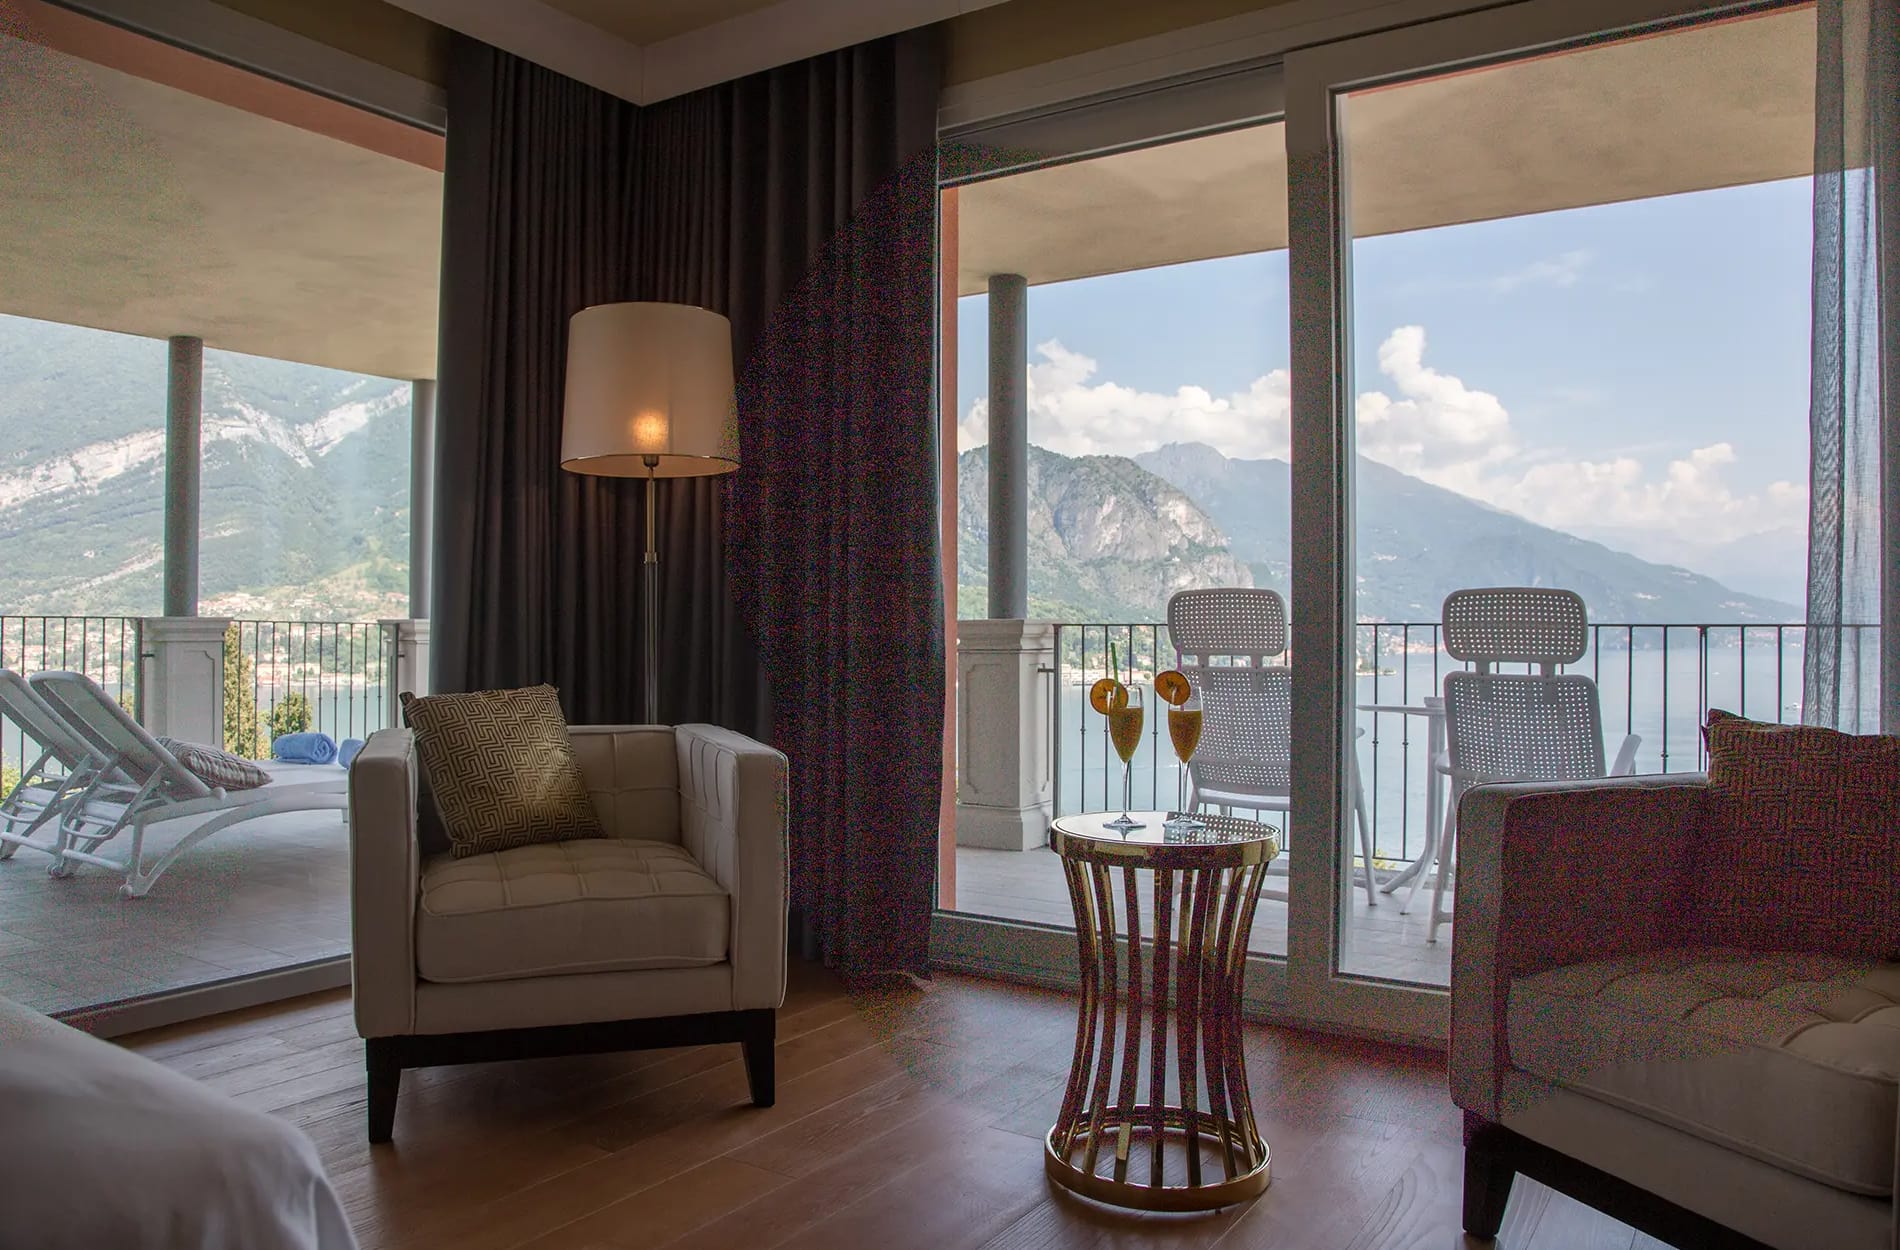 Suite with private patio on Lake Como